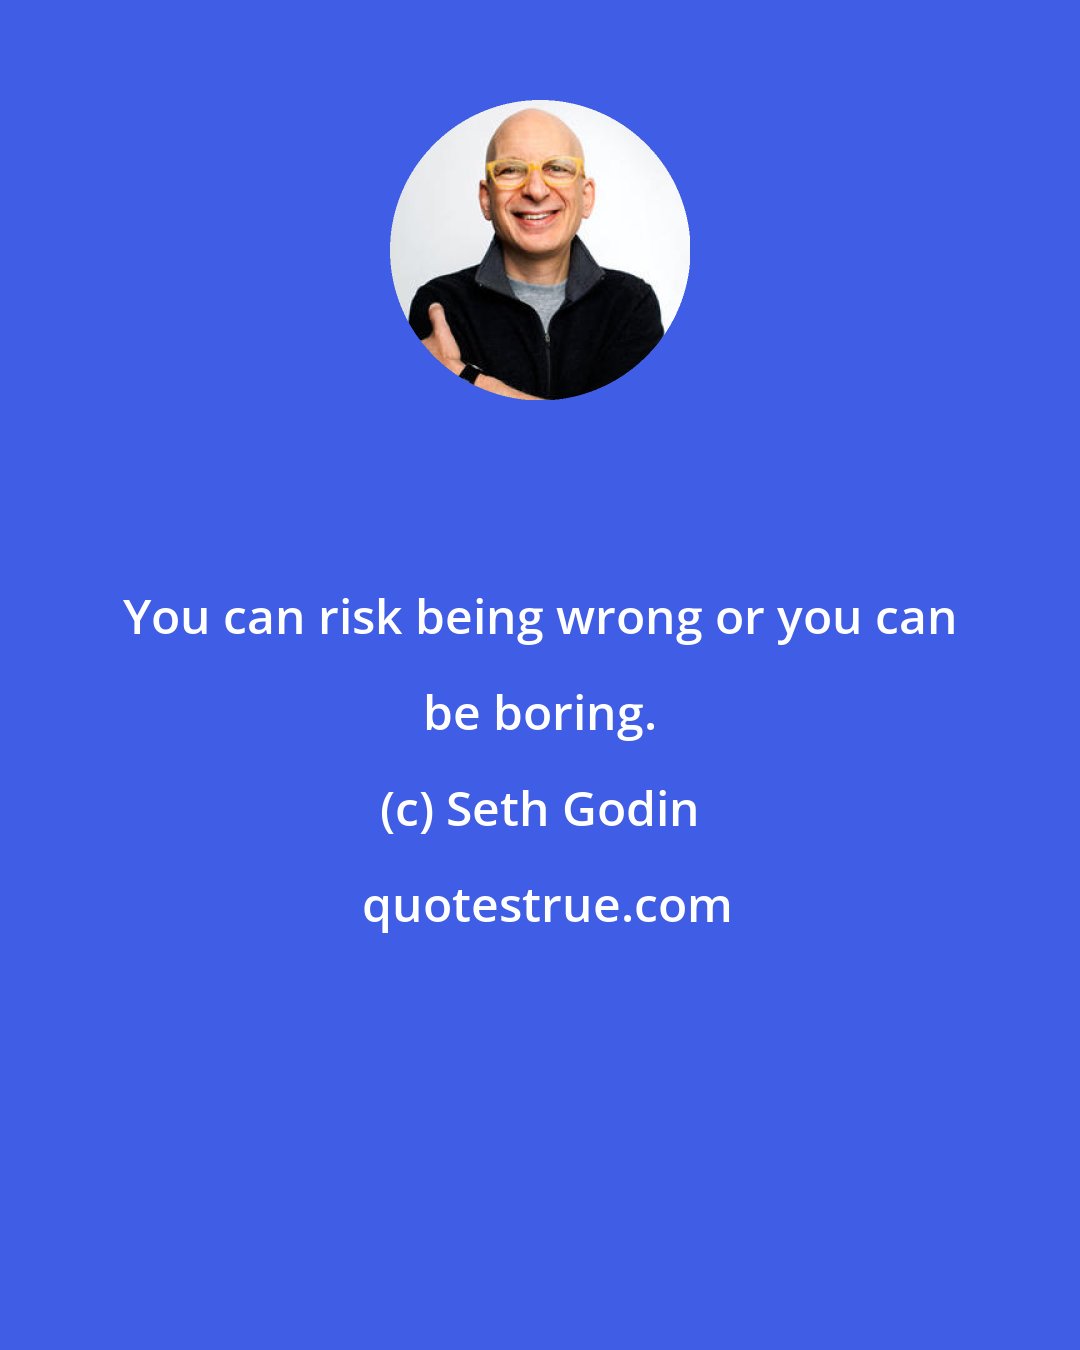 Seth Godin: You can risk being wrong or you can be boring.